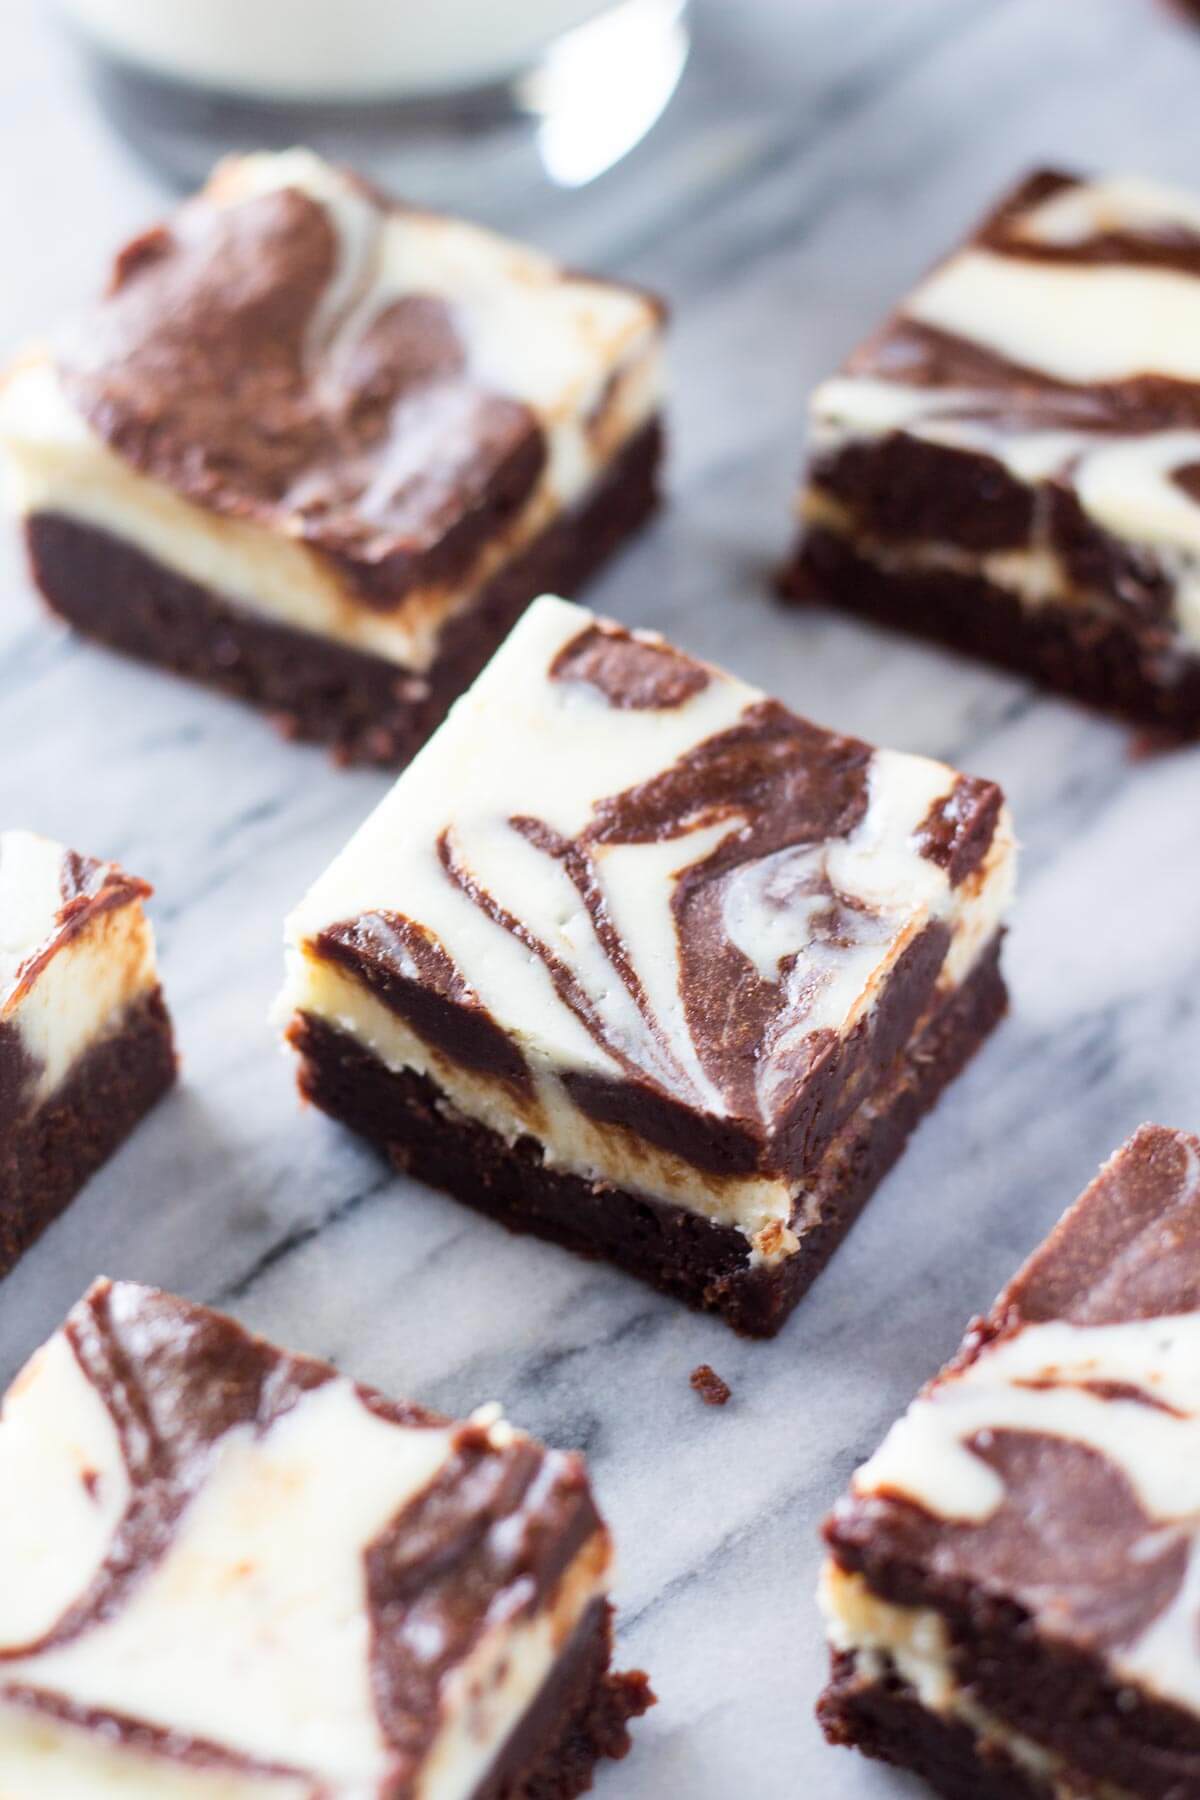 Cream Cheese Brownies - Super fudgy, chocolatey brownies swirled with a layer of classic cheesecake. These are the ULTIMATE dessert!